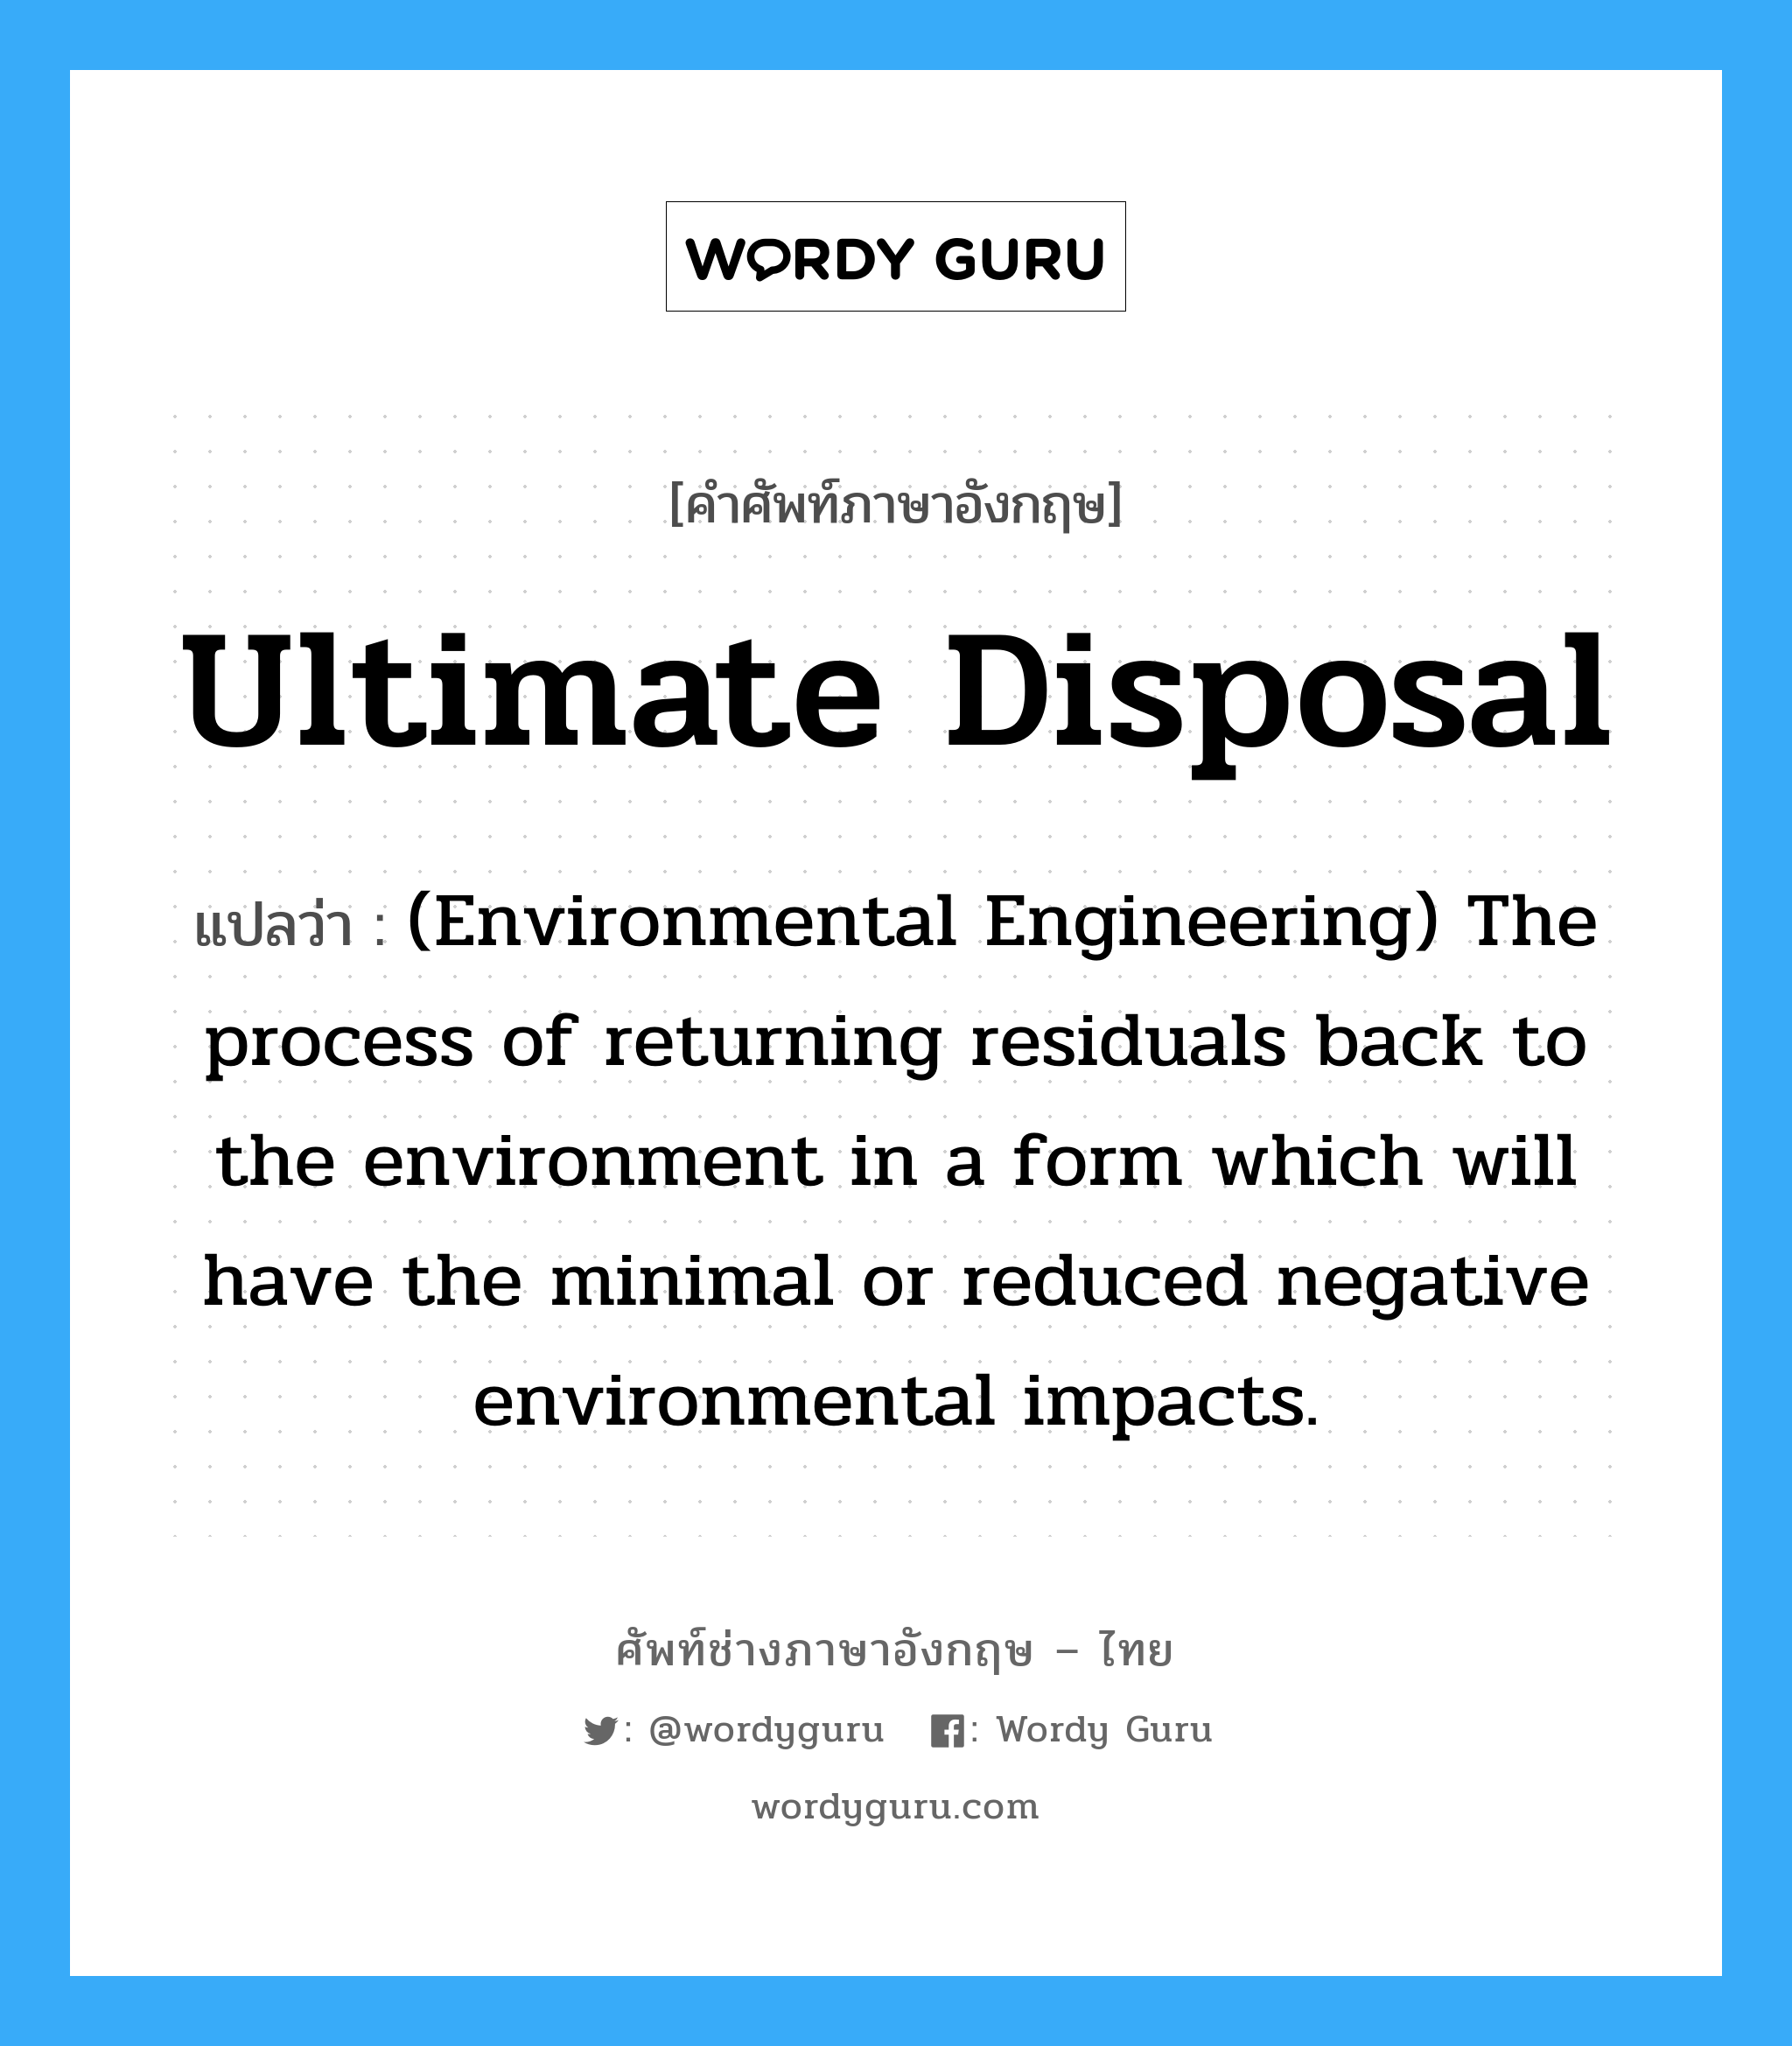 (Environmental Engineering) The process of cleaning up a hazardous waste disposal site that has either been abandoned or that those responsible either refuse to cleanup or are financially unable to cleanup. ภาษาอังกฤษ?, คำศัพท์ช่างภาษาอังกฤษ - ไทย (Environmental Engineering) The process of returning residuals back to the environment in a form which will have the minimal or reduced negative environmental impacts. คำศัพท์ภาษาอังกฤษ (Environmental Engineering) The process of returning residuals back to the environment in a form which will have the minimal or reduced negative environmental impacts. แปลว่า Ultimate disposal